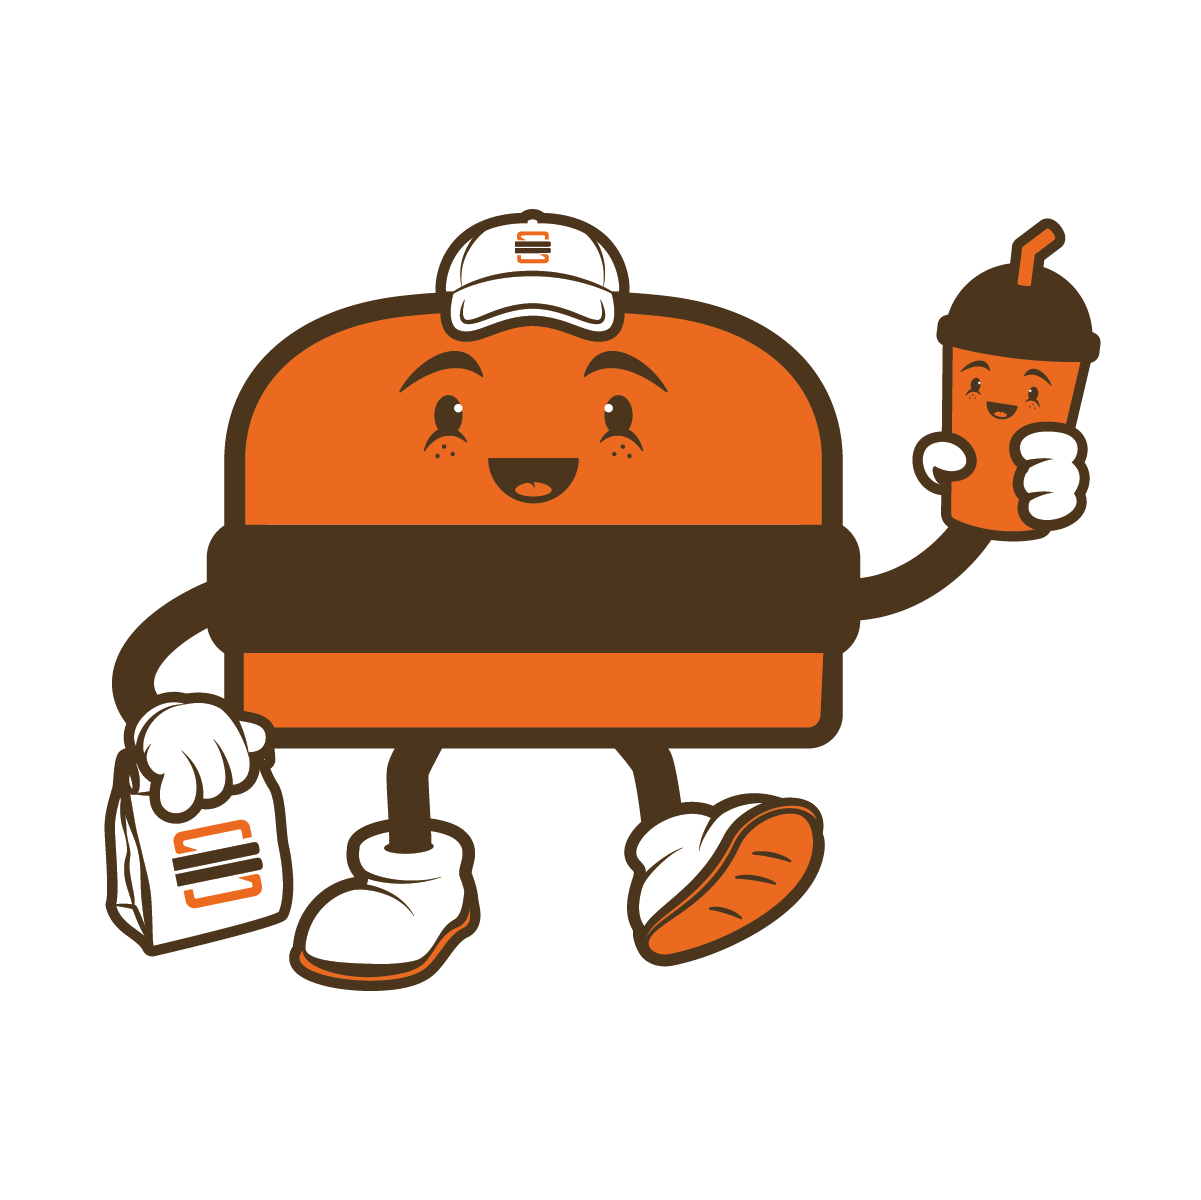 Square Burger Mascot logo design by logo designer Amy Lyons for your inspiration and for the worlds largest logo competition